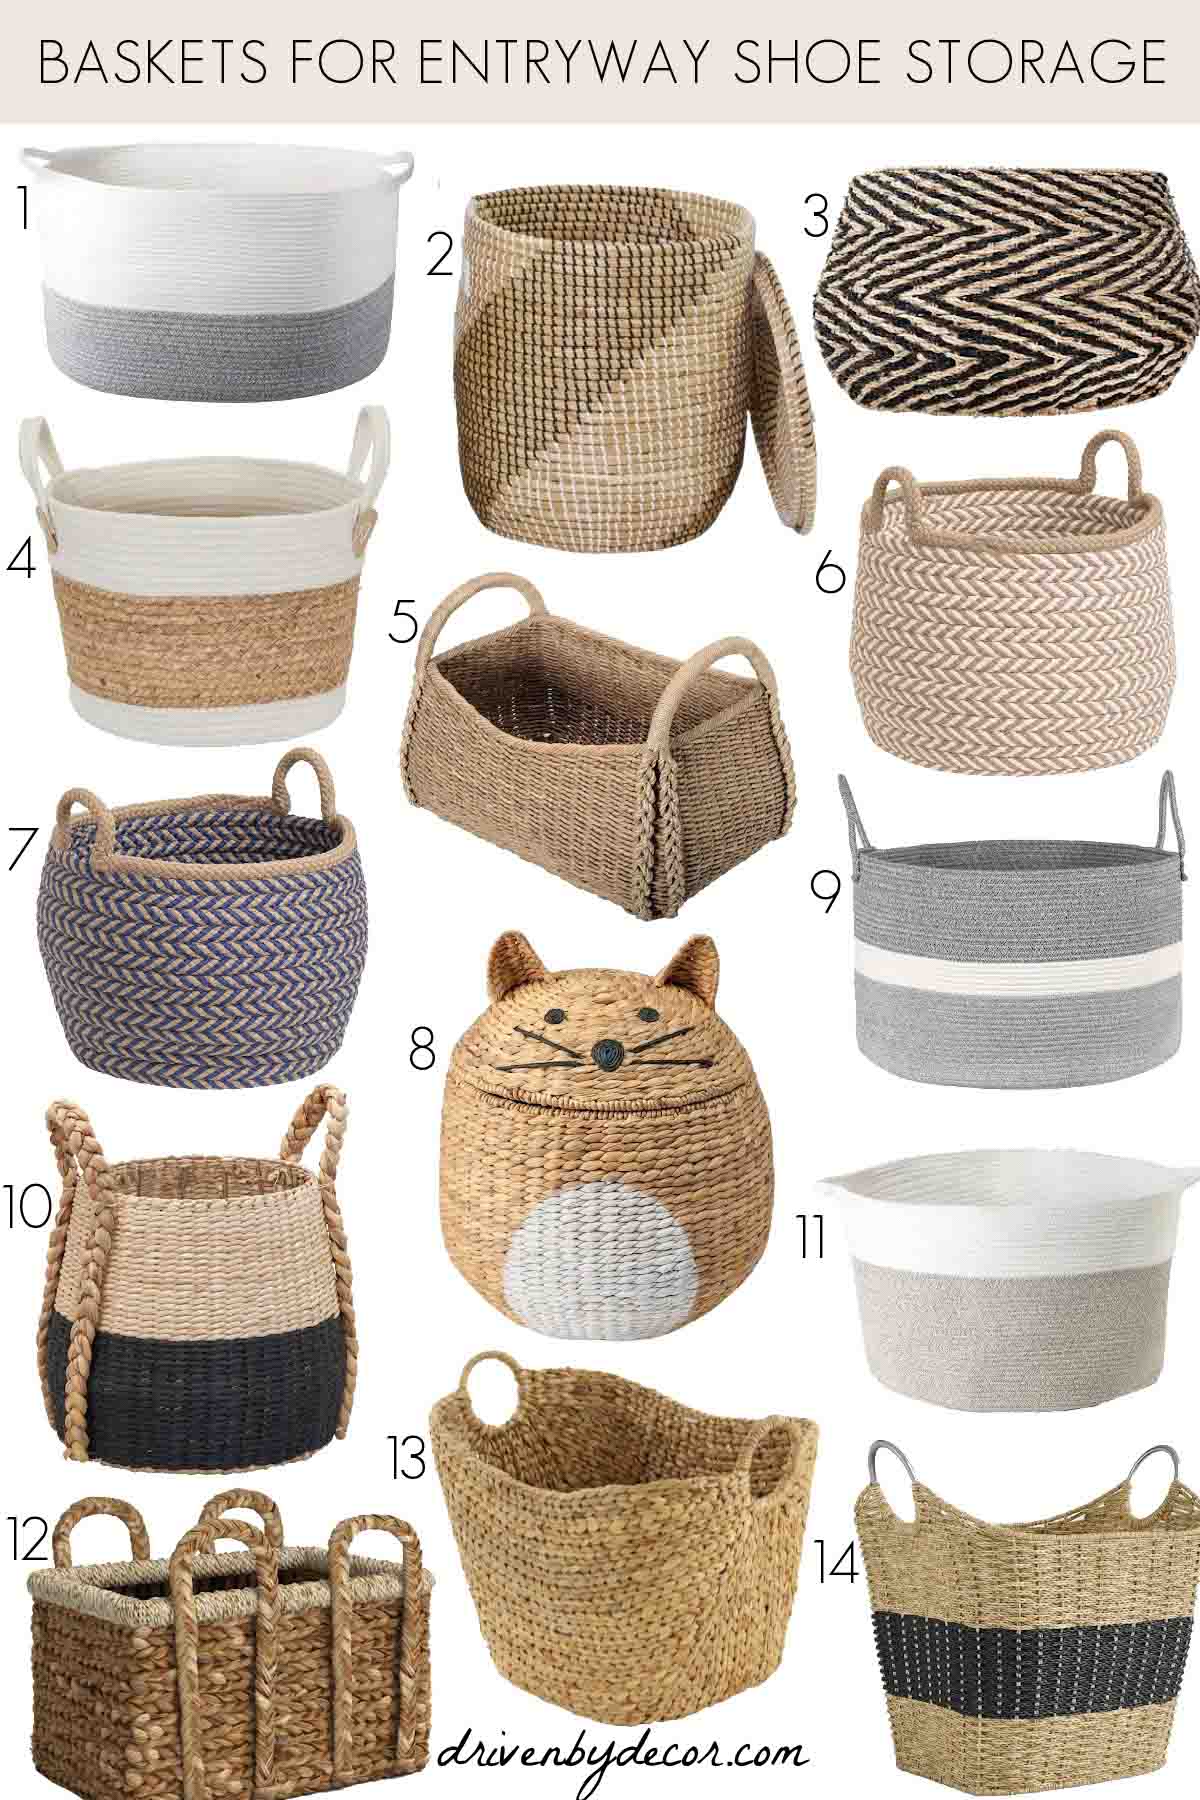 Baskets for entryway shoe storage